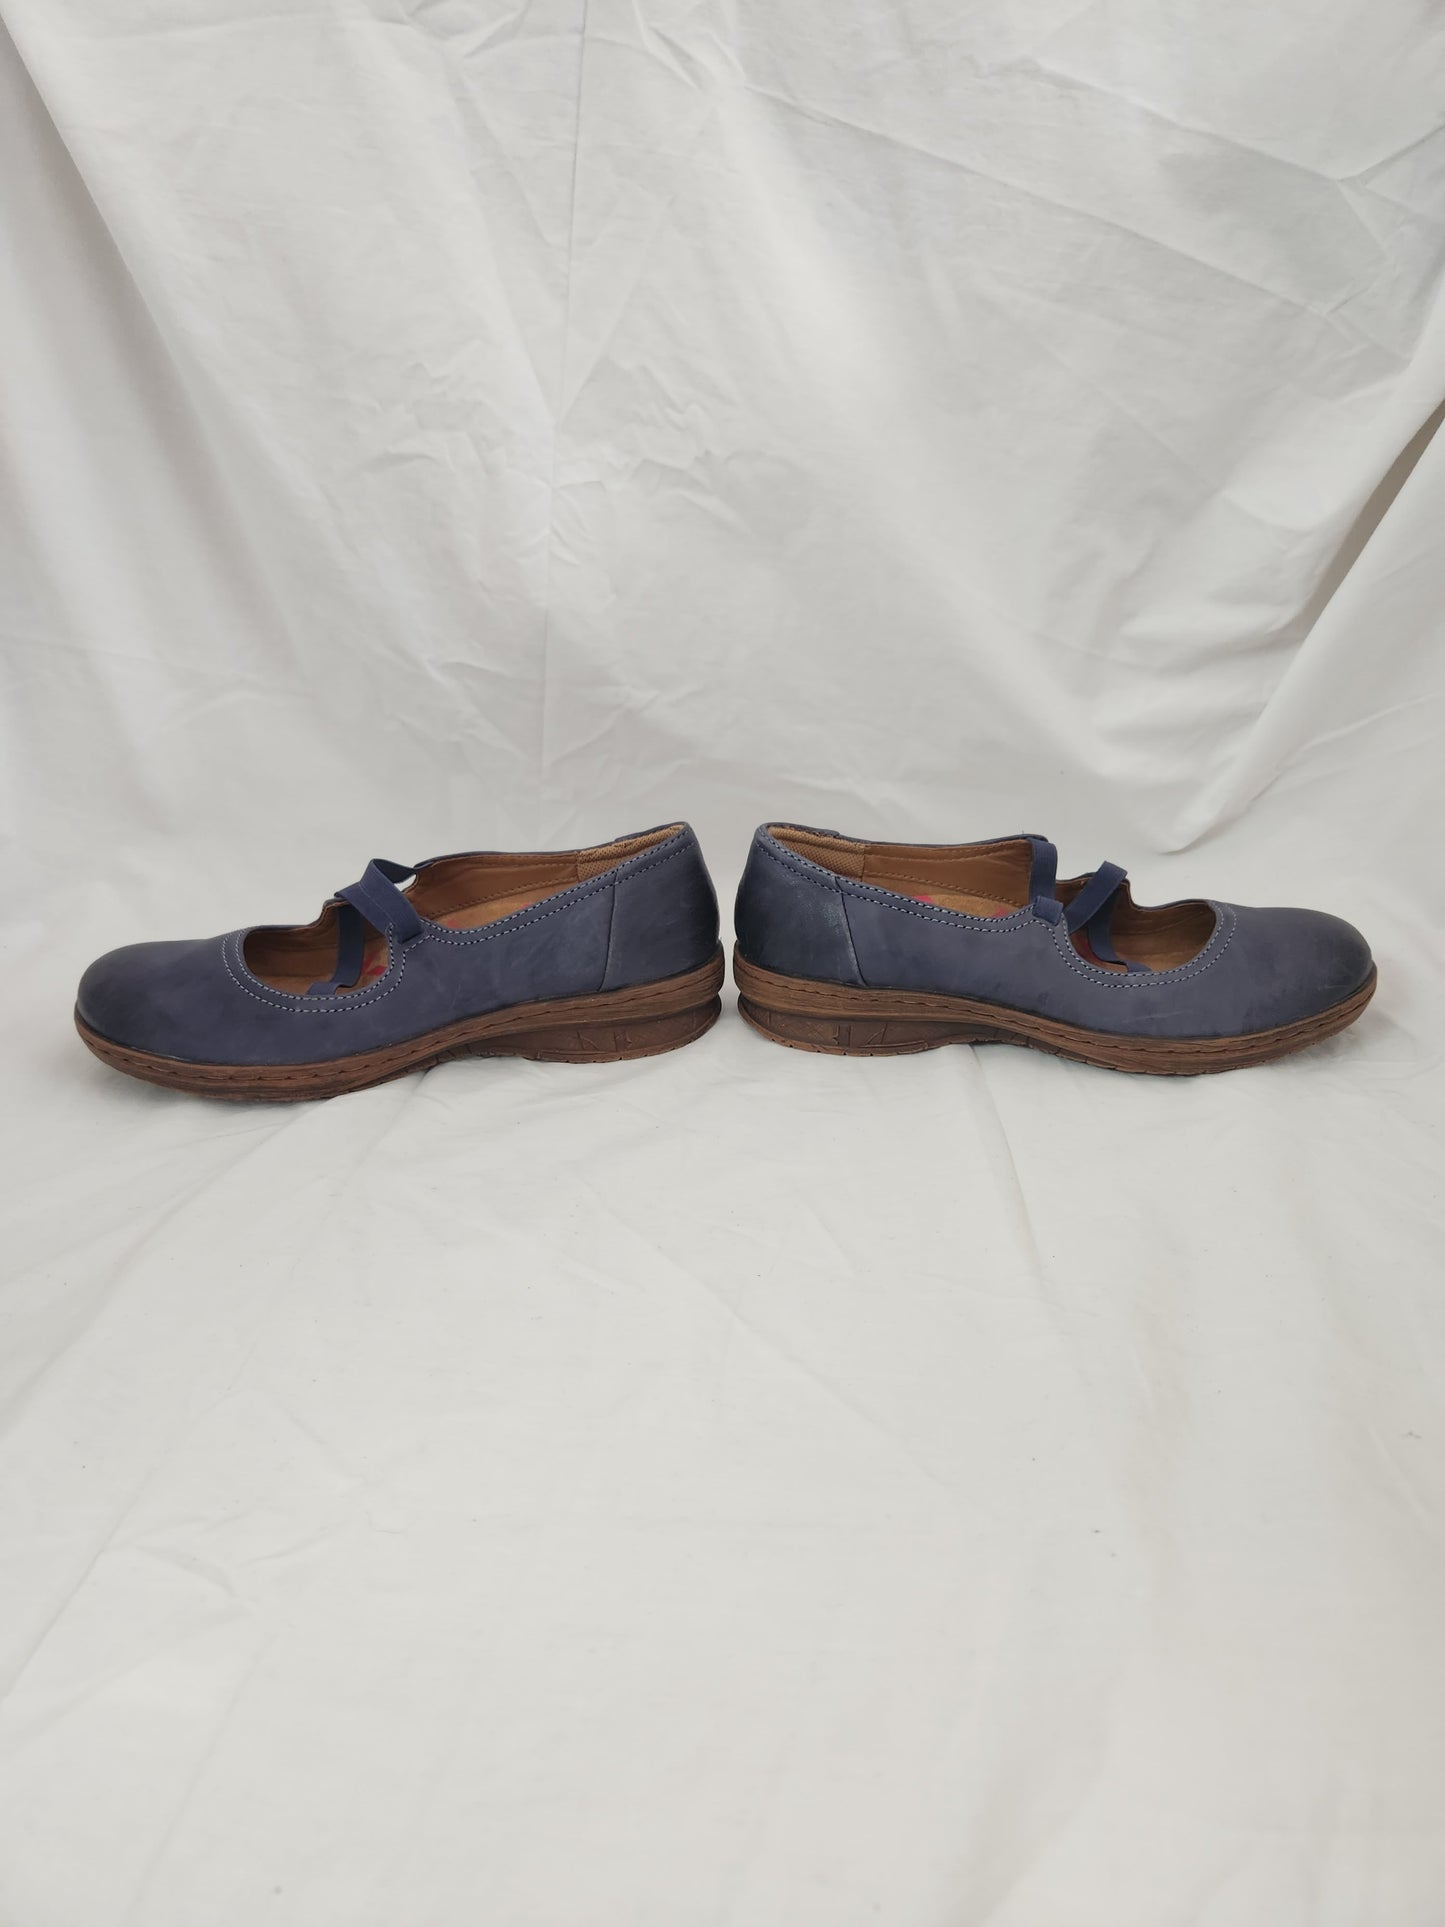 Comfortiva Align Blue Mary Janes - Size: 7-N